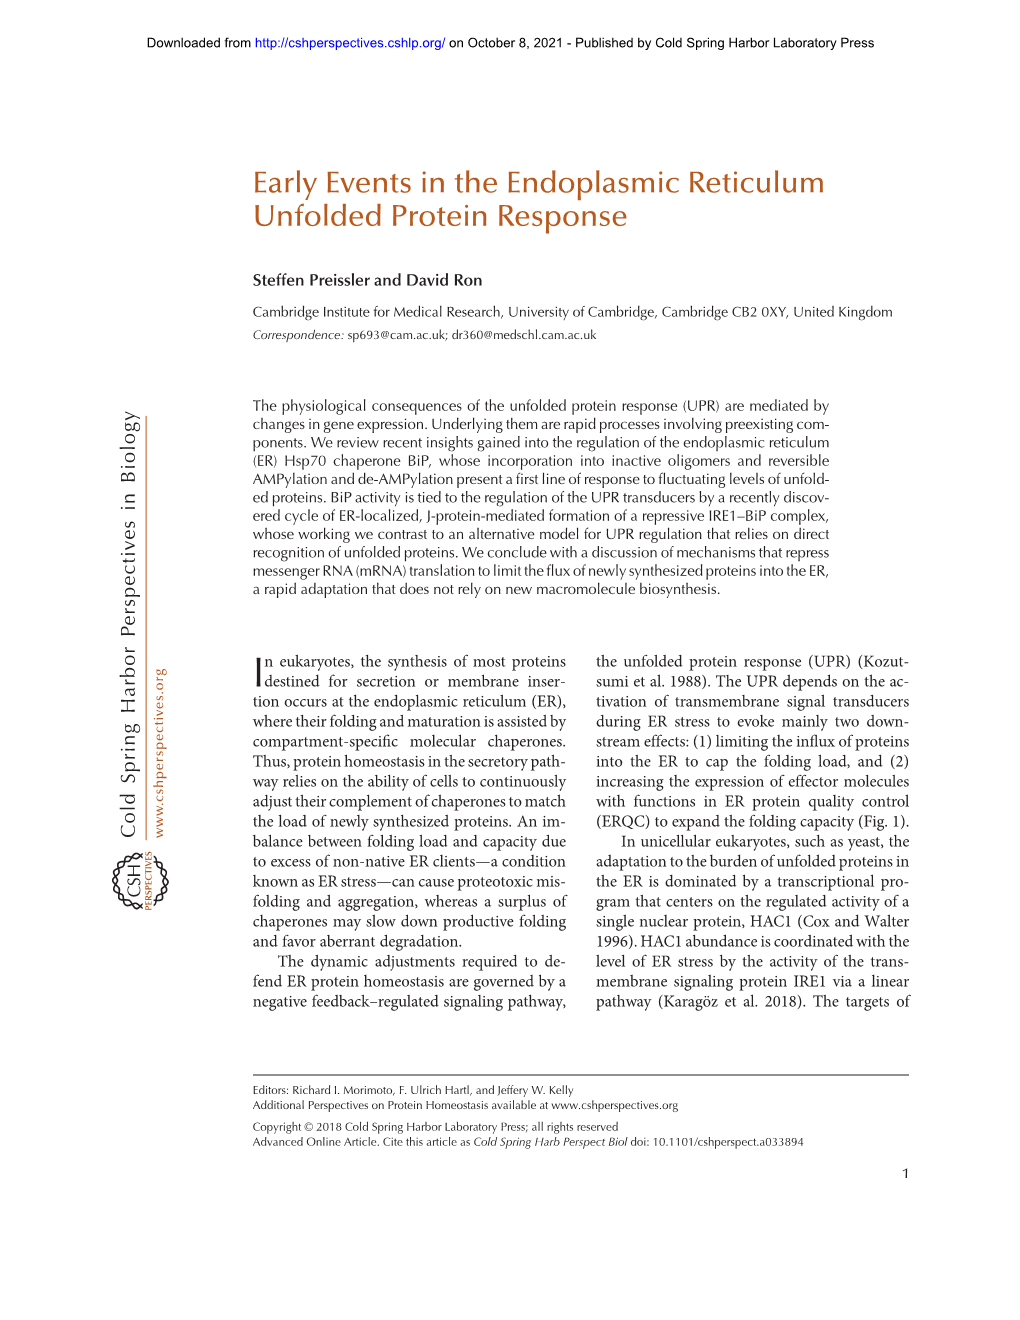 Early Events in the Endoplasmic Reticulum Unfolded Protein Response